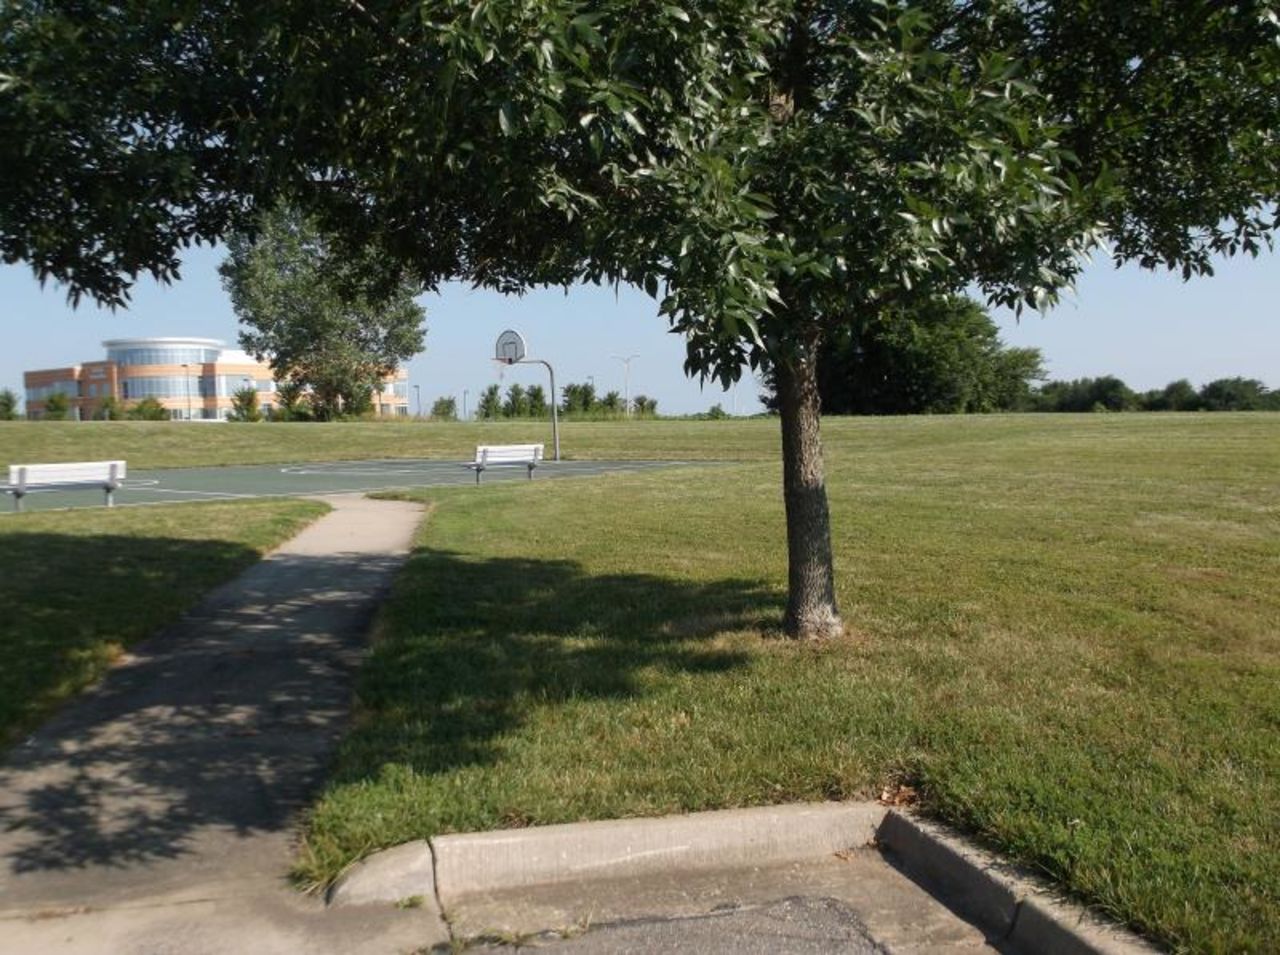 Manley is consistently matter-of-fact about the details of his suicide plan. But it's not  hard to feel chills at this photo he snapped of the exact spot -- under the tree -- where he would take his own life.﻿